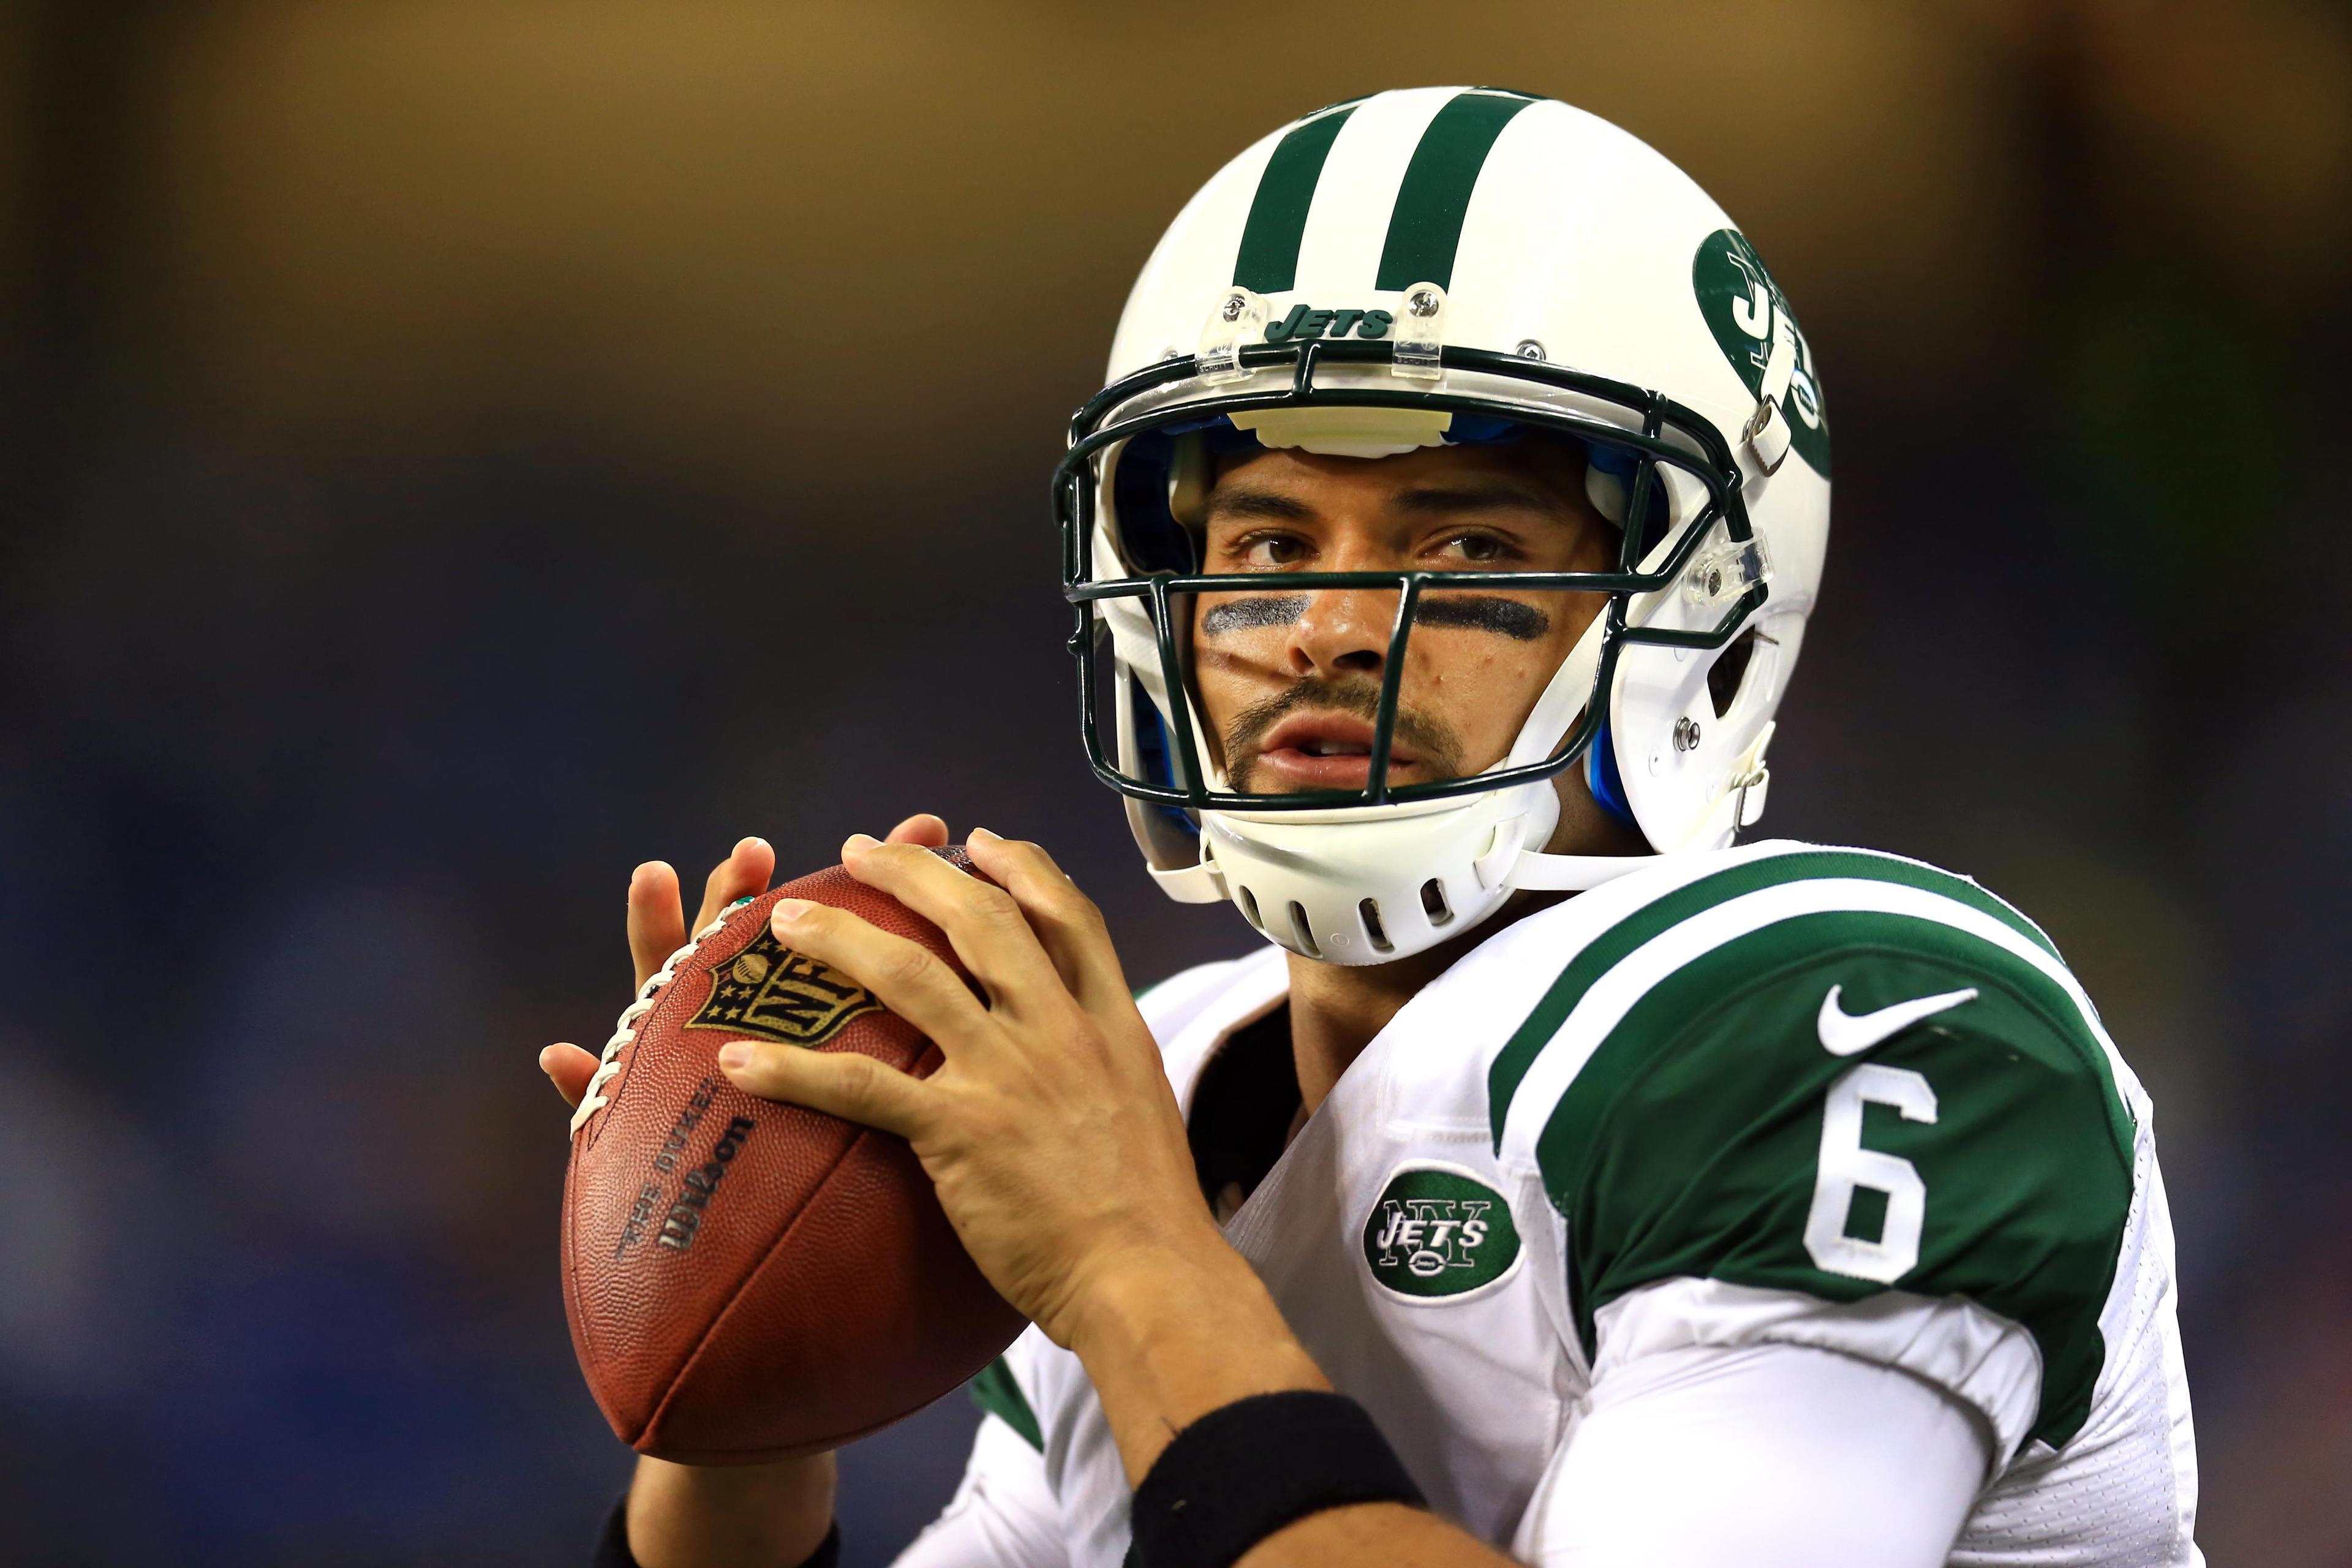 Aug 9, 2013; Detroit, MI, USA; New York Jets quarterback Mark Sanchez (6) in the first quarter of a preseason game against the Detroit Lions at Ford Field. Mandatory Credit: Andrew Weber-USA TODAY Sports / Andrew Weber-USA TODAY Sports